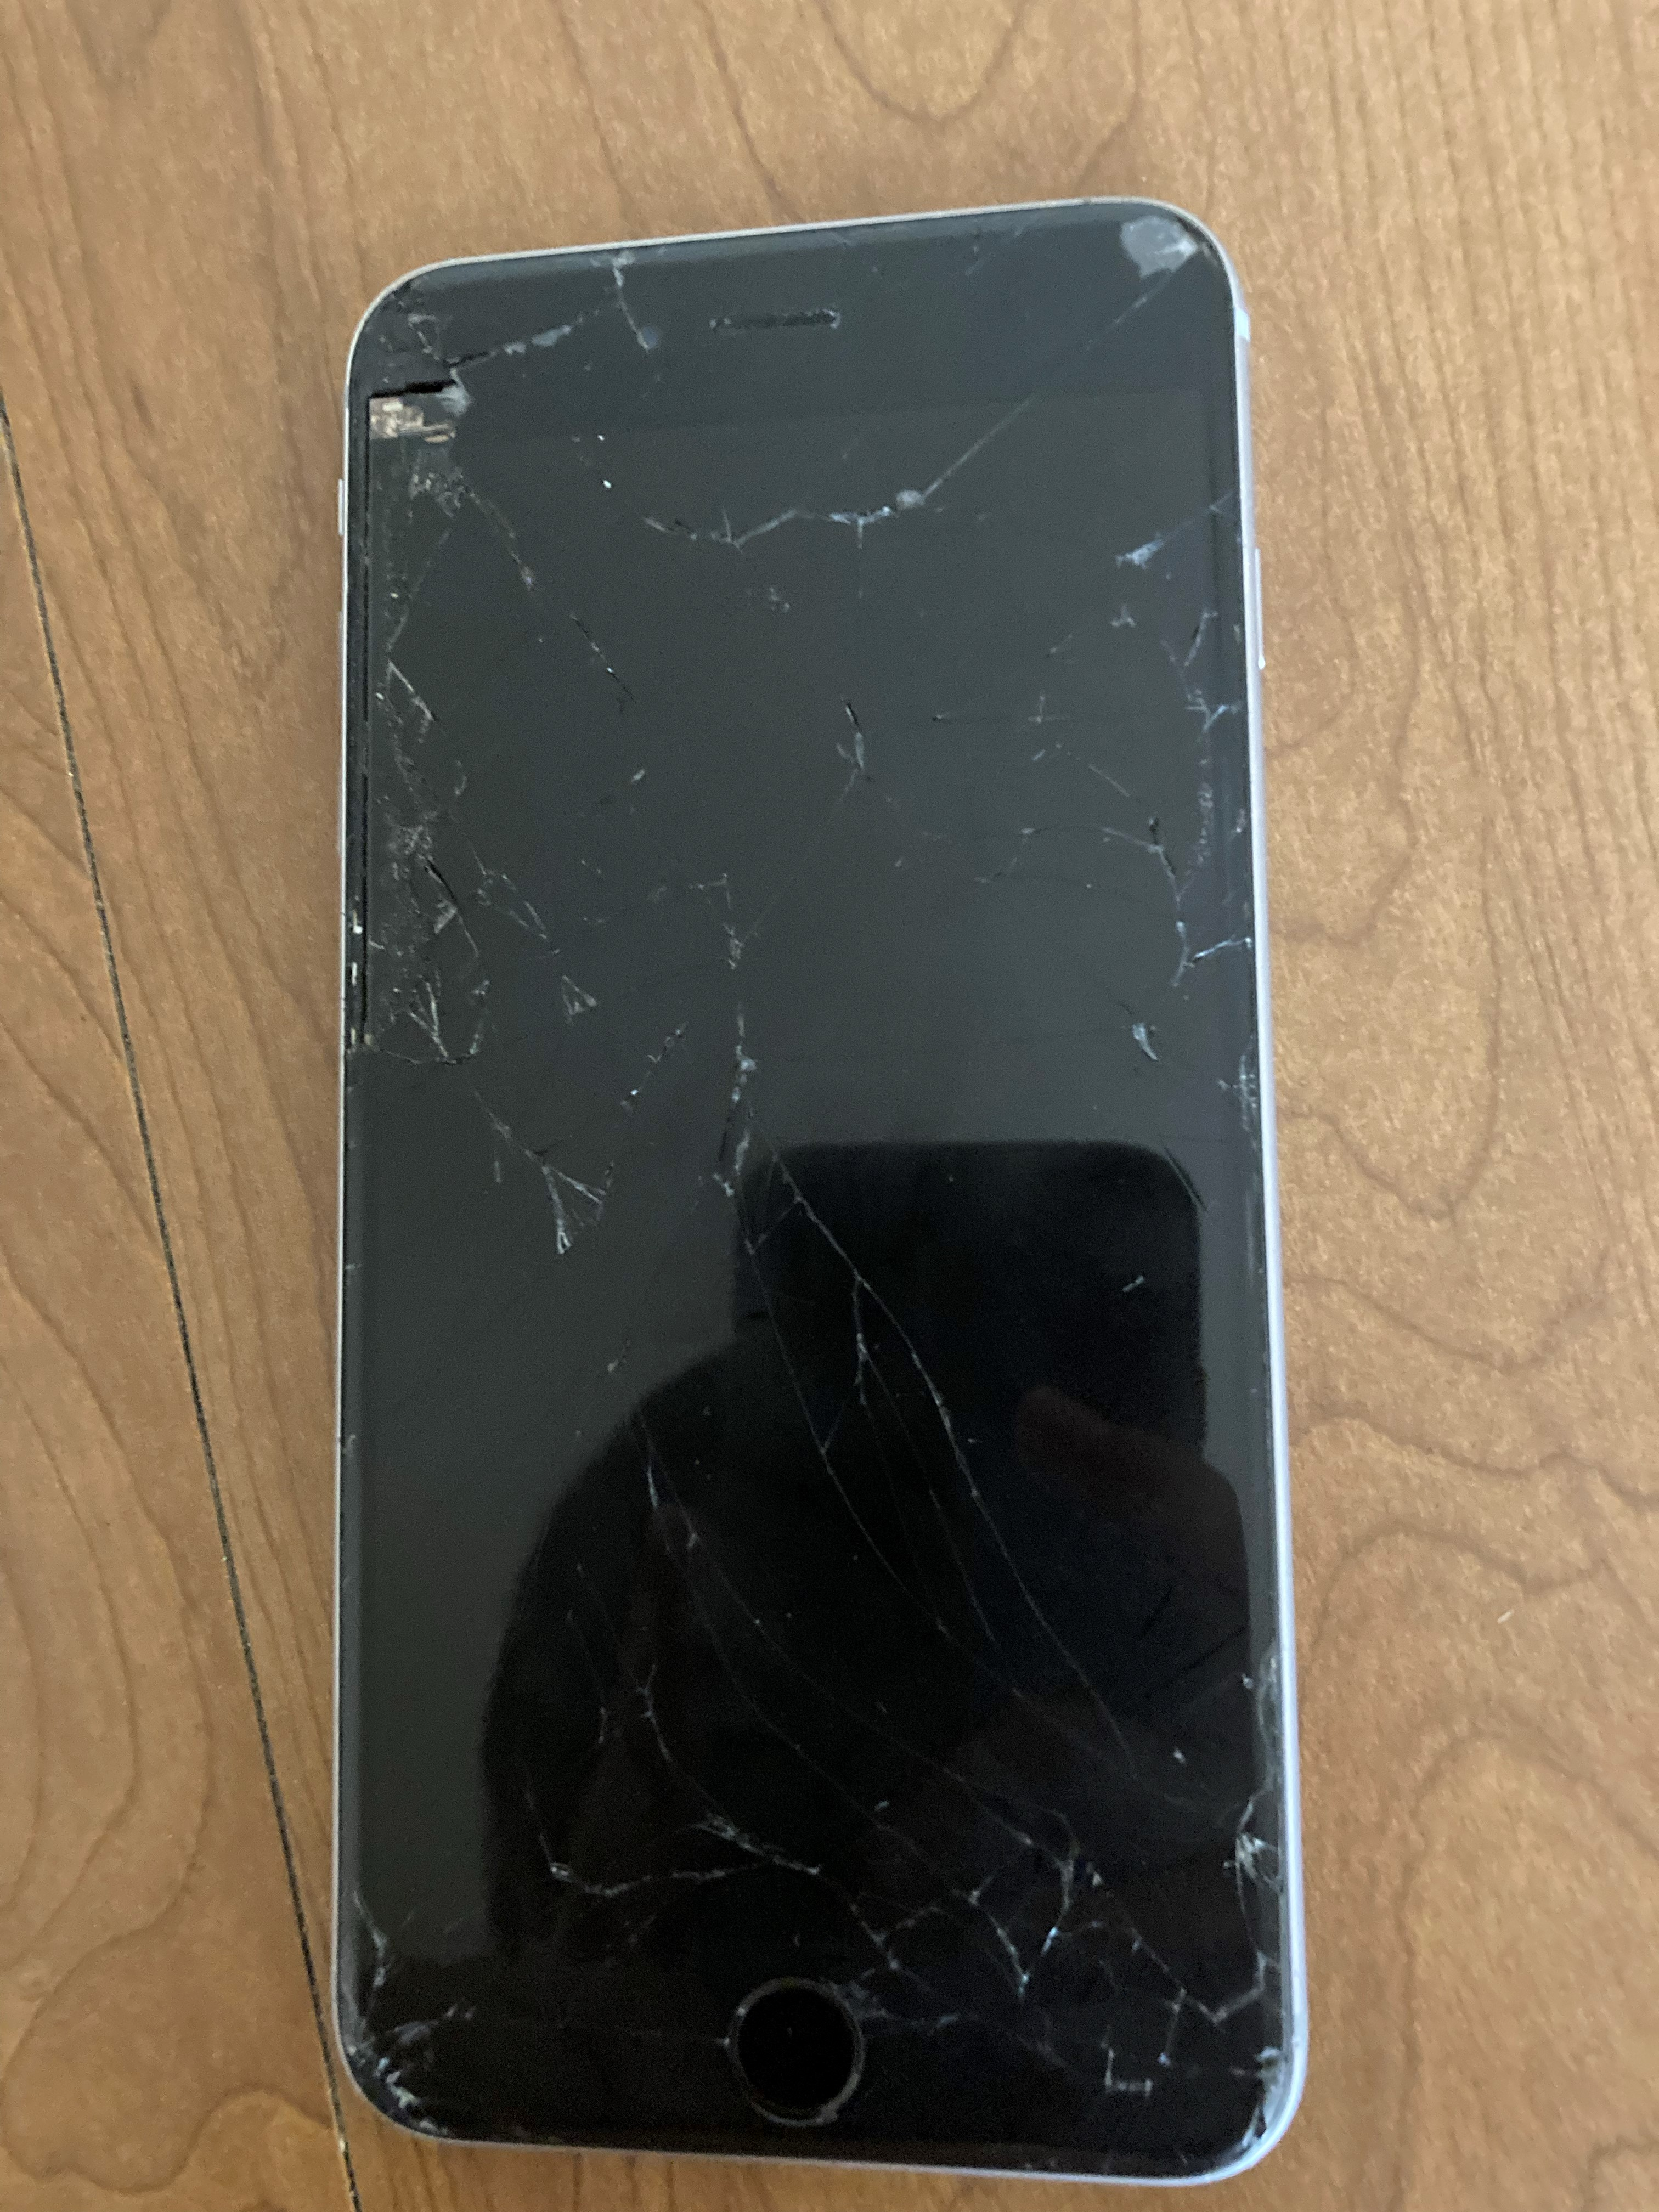 Broken iPhone 6s Plus that will be repaired